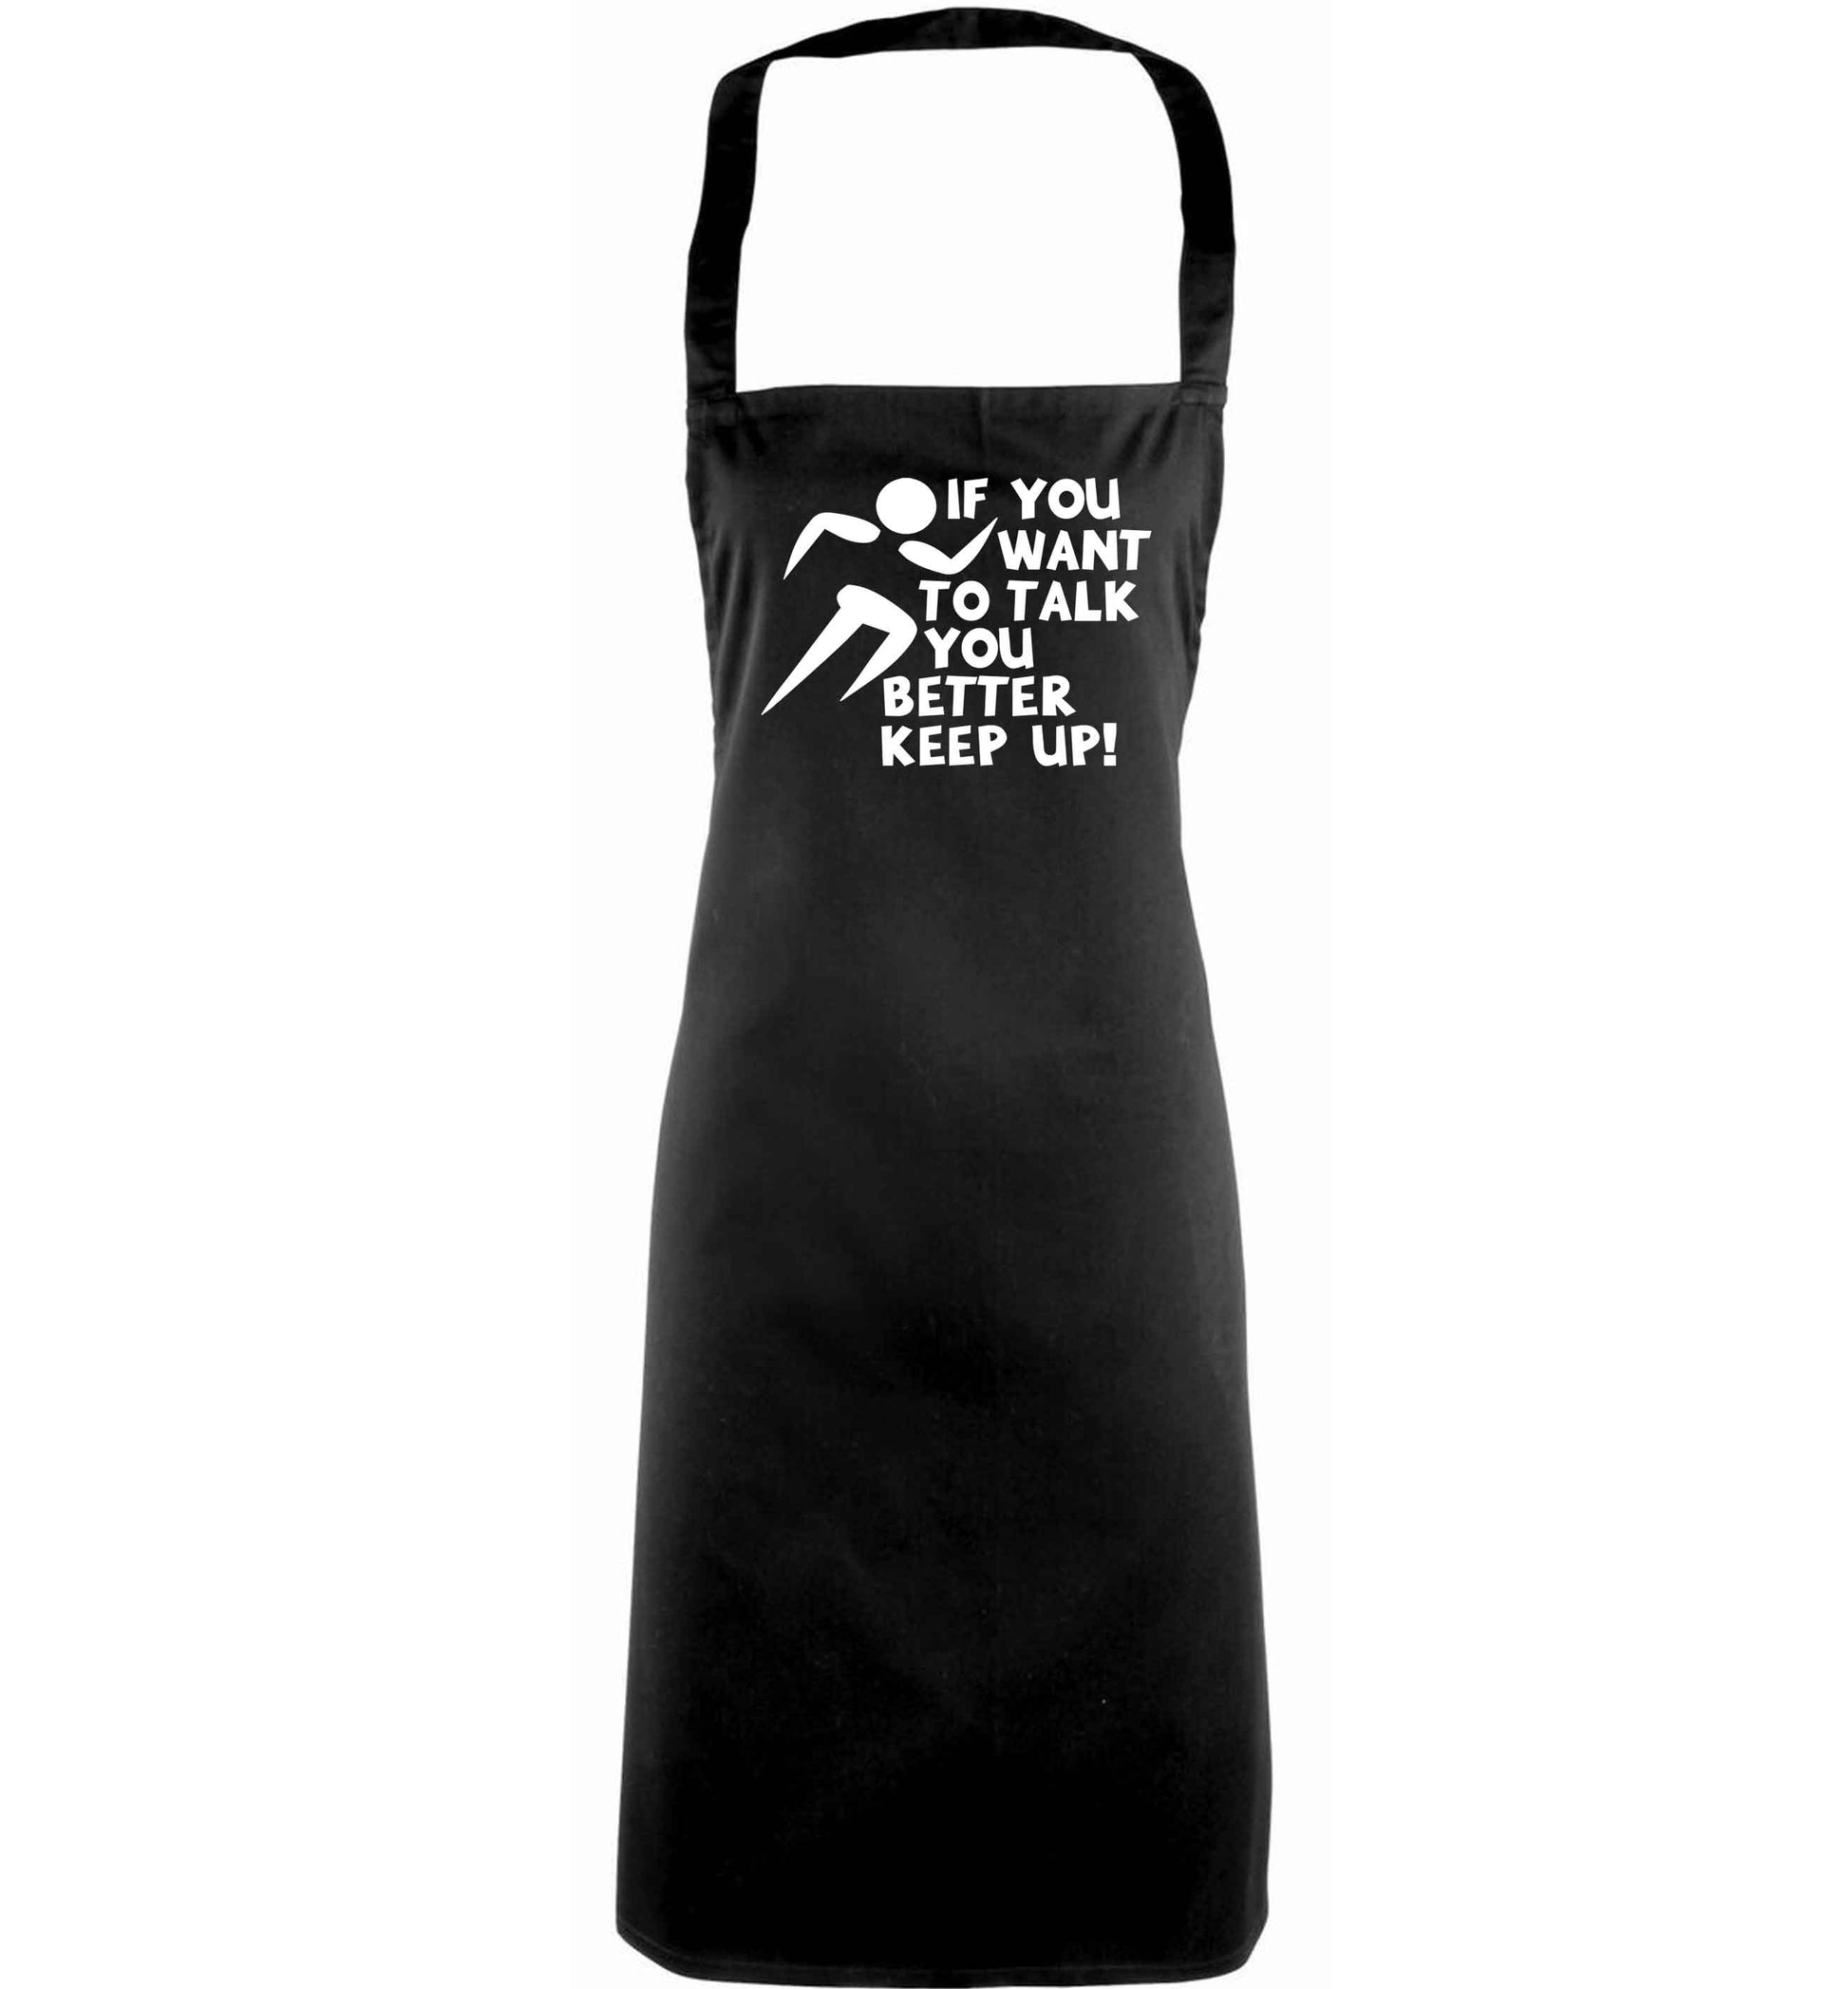 If you want to talk you better keep up! adults black apron